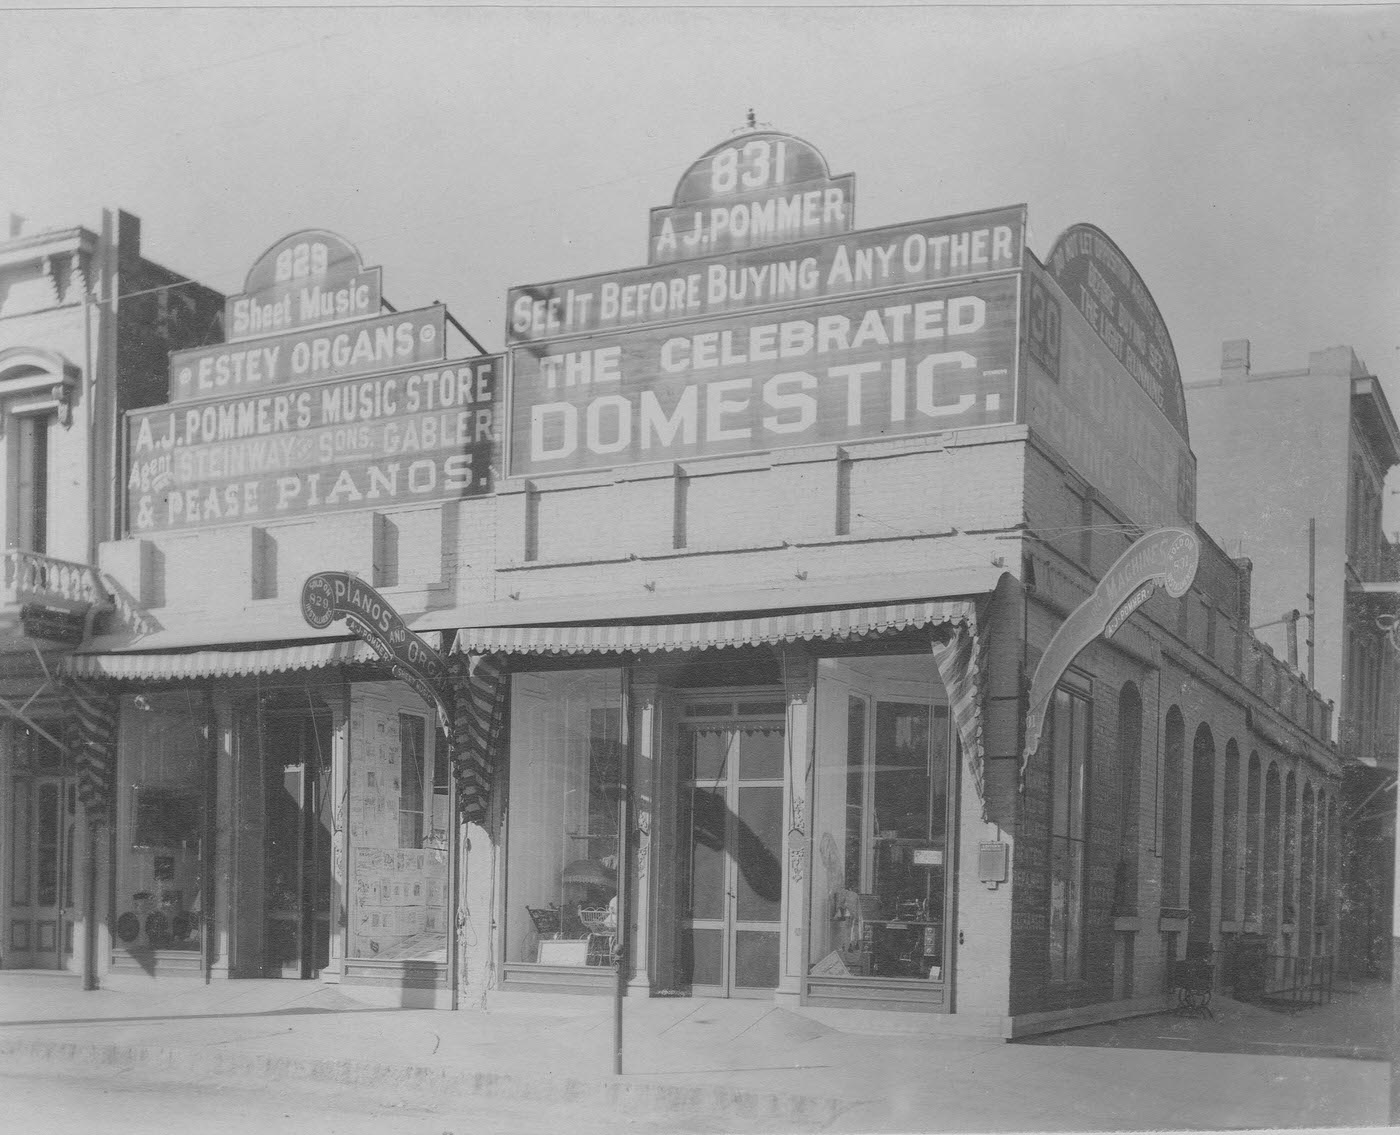 A. J. Pommer's building as it stood in 1896. Its 829 J St. location sold musical supplies, while sewing machines were offered at 831 J St. Both stores were at the northwest corner of Ninth and J streets.